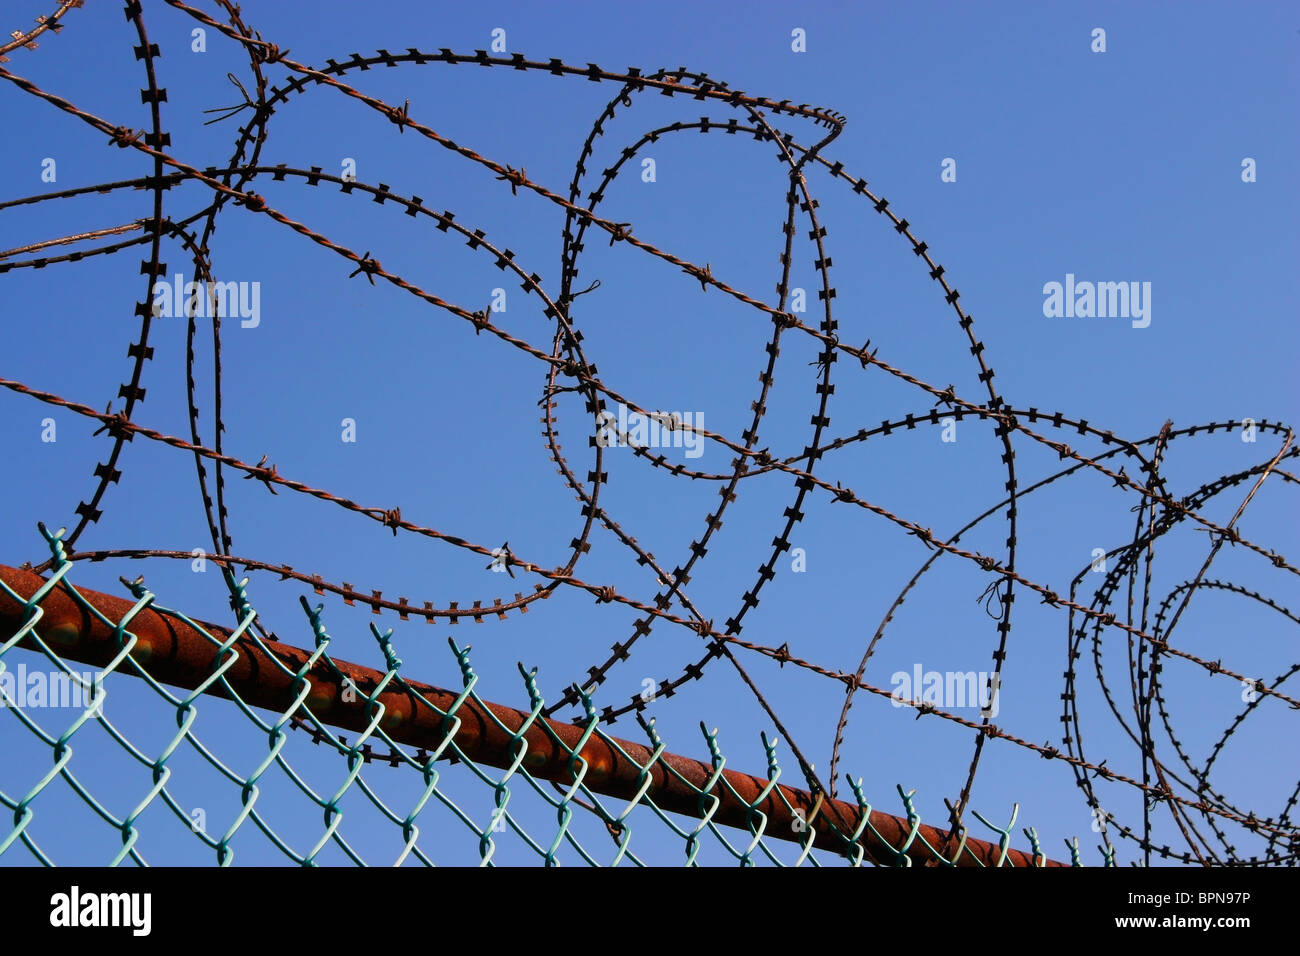 Razor wire, barbed wire, and chain-link fencing restrict entry. Stock Photo